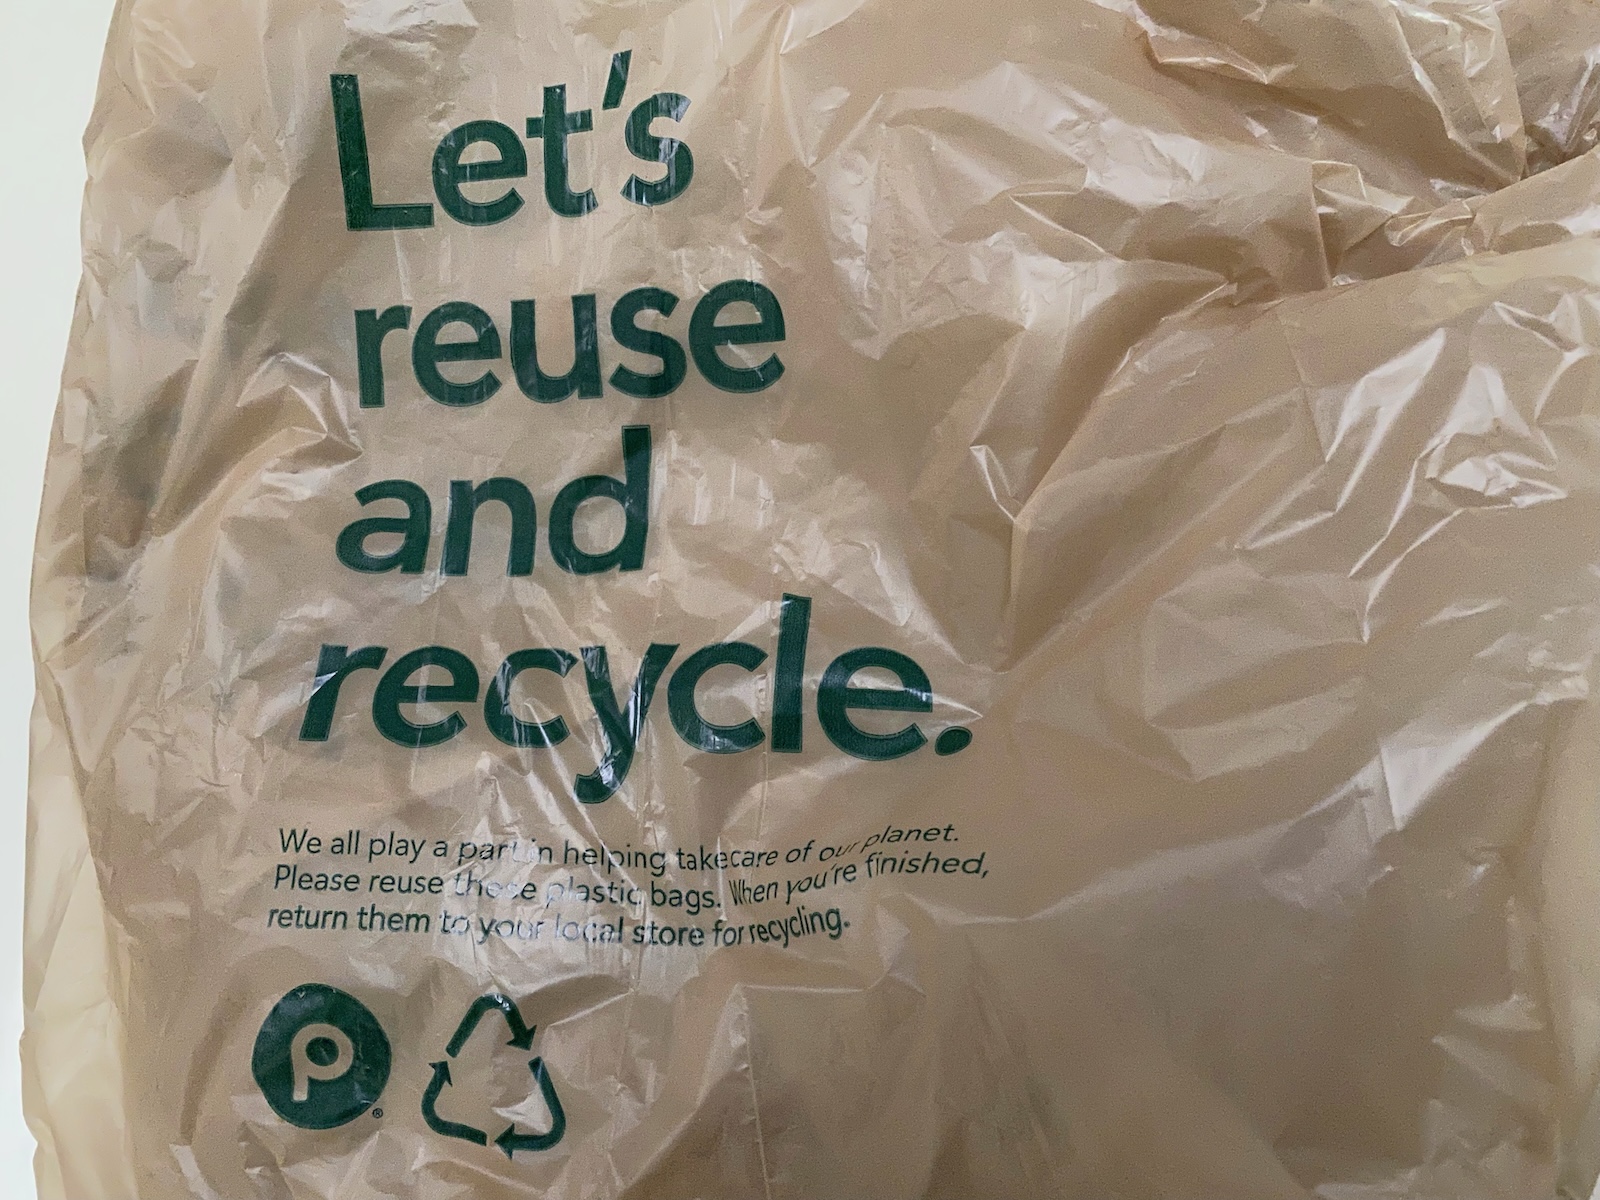 Plastic bag with text: Let's reuse and recycle